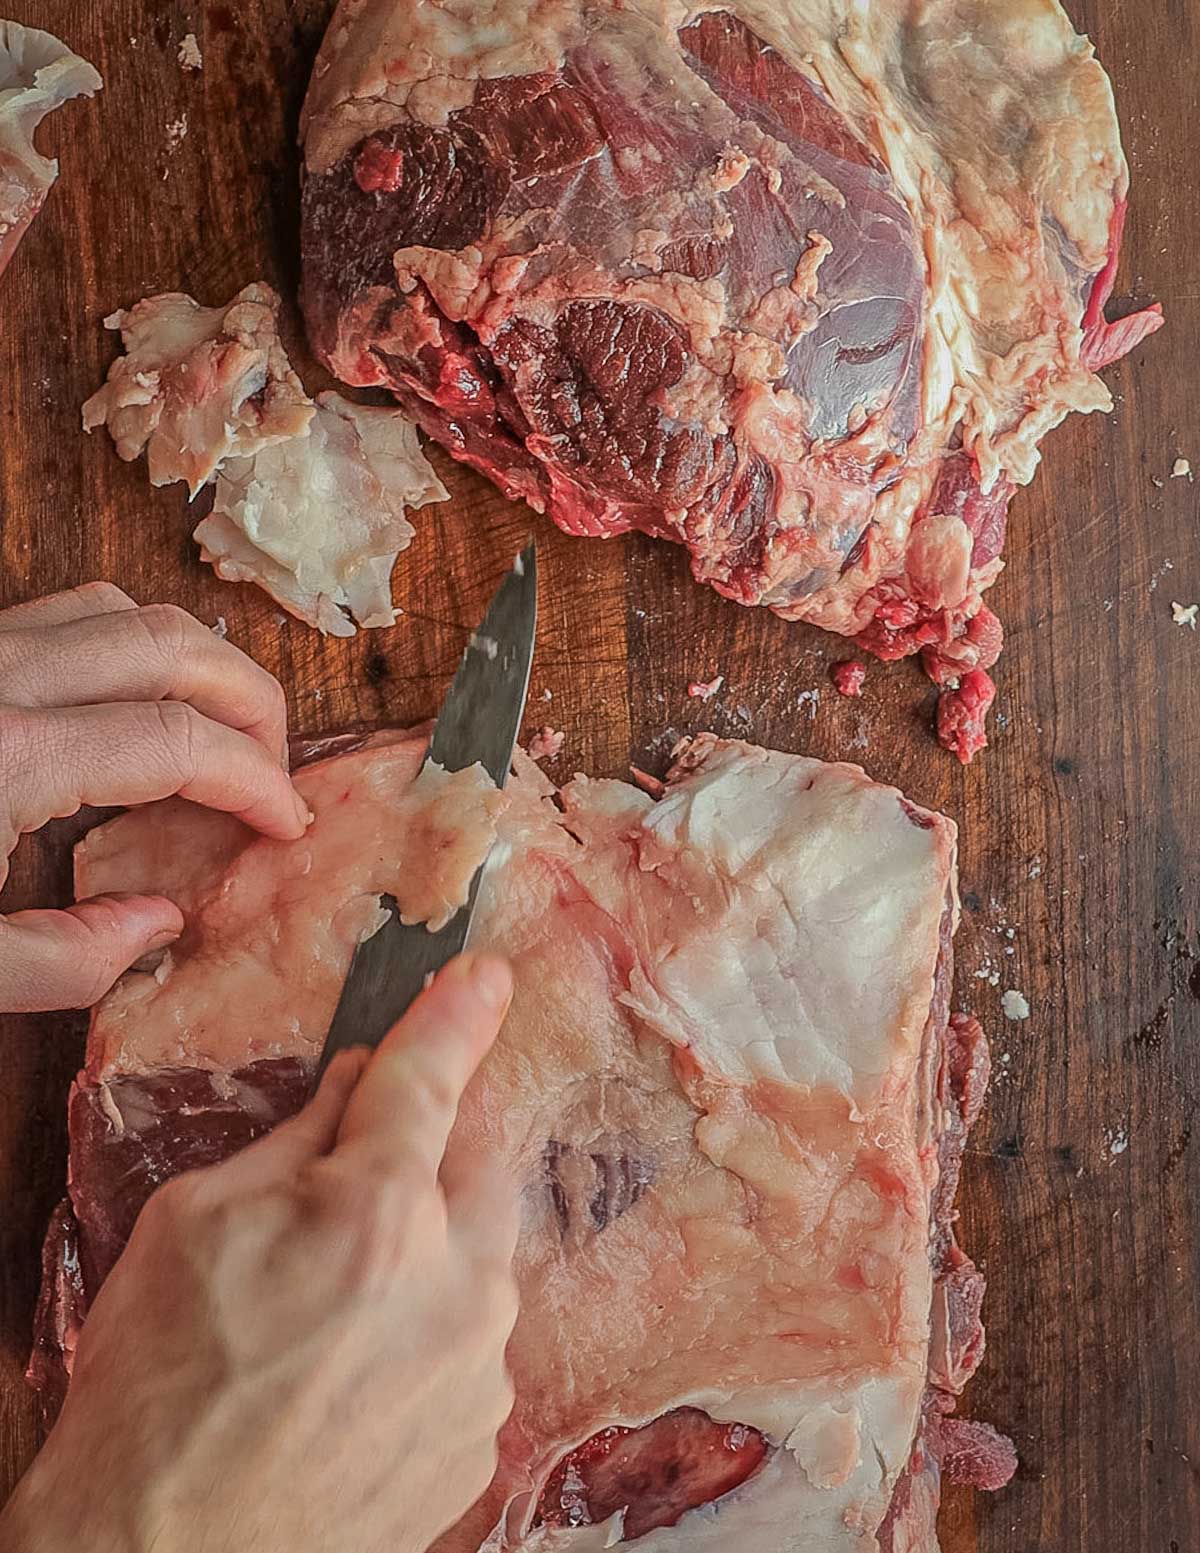 Trimming and removing the fat from a leg of lamb.